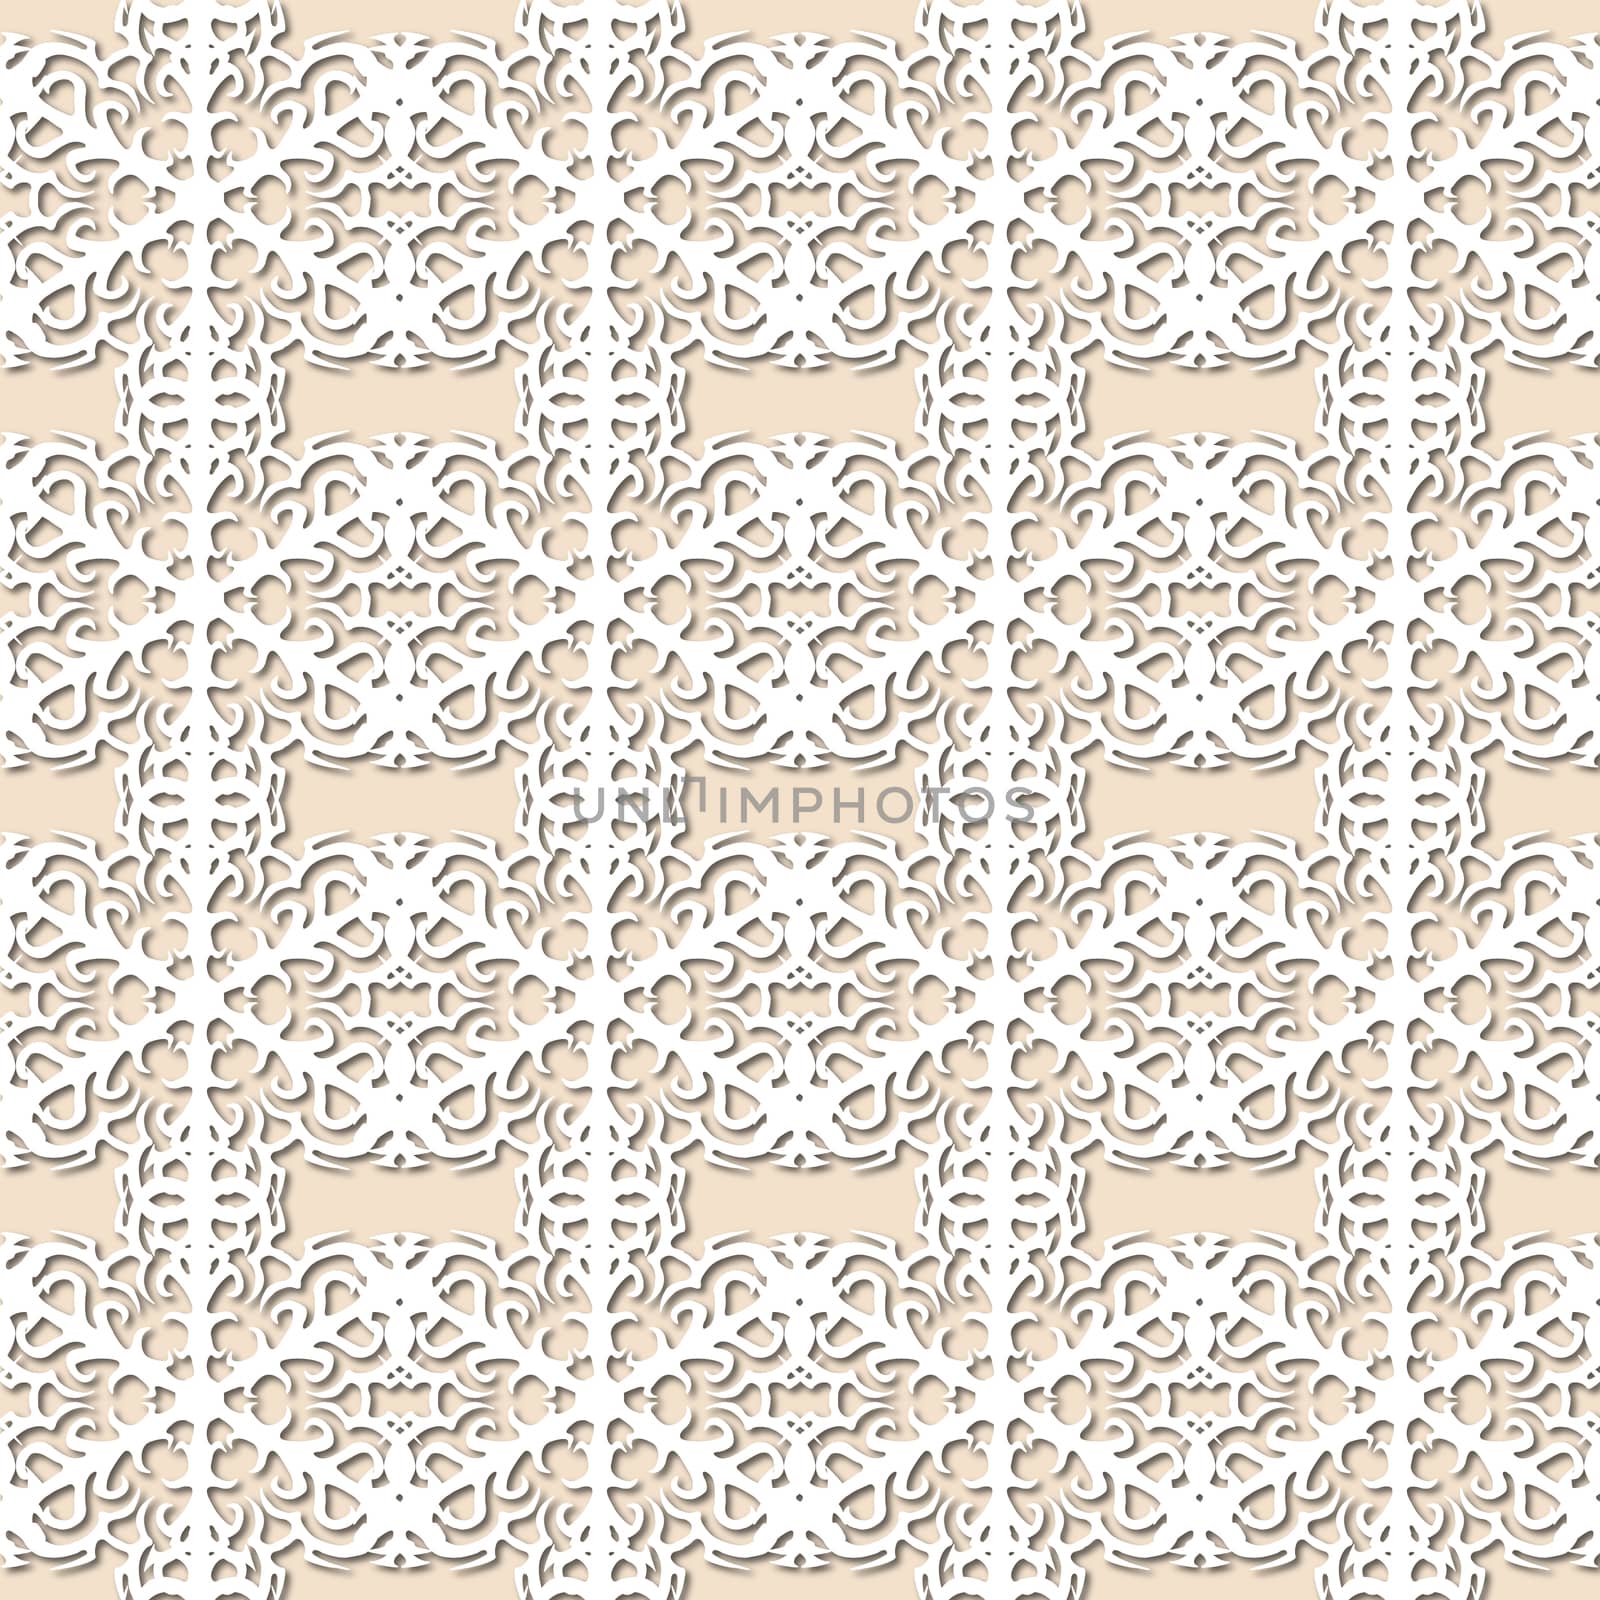 White snowflakes on pale pink, beige background, damask ornament seamless pattern. Paper cut style by Pashchenko